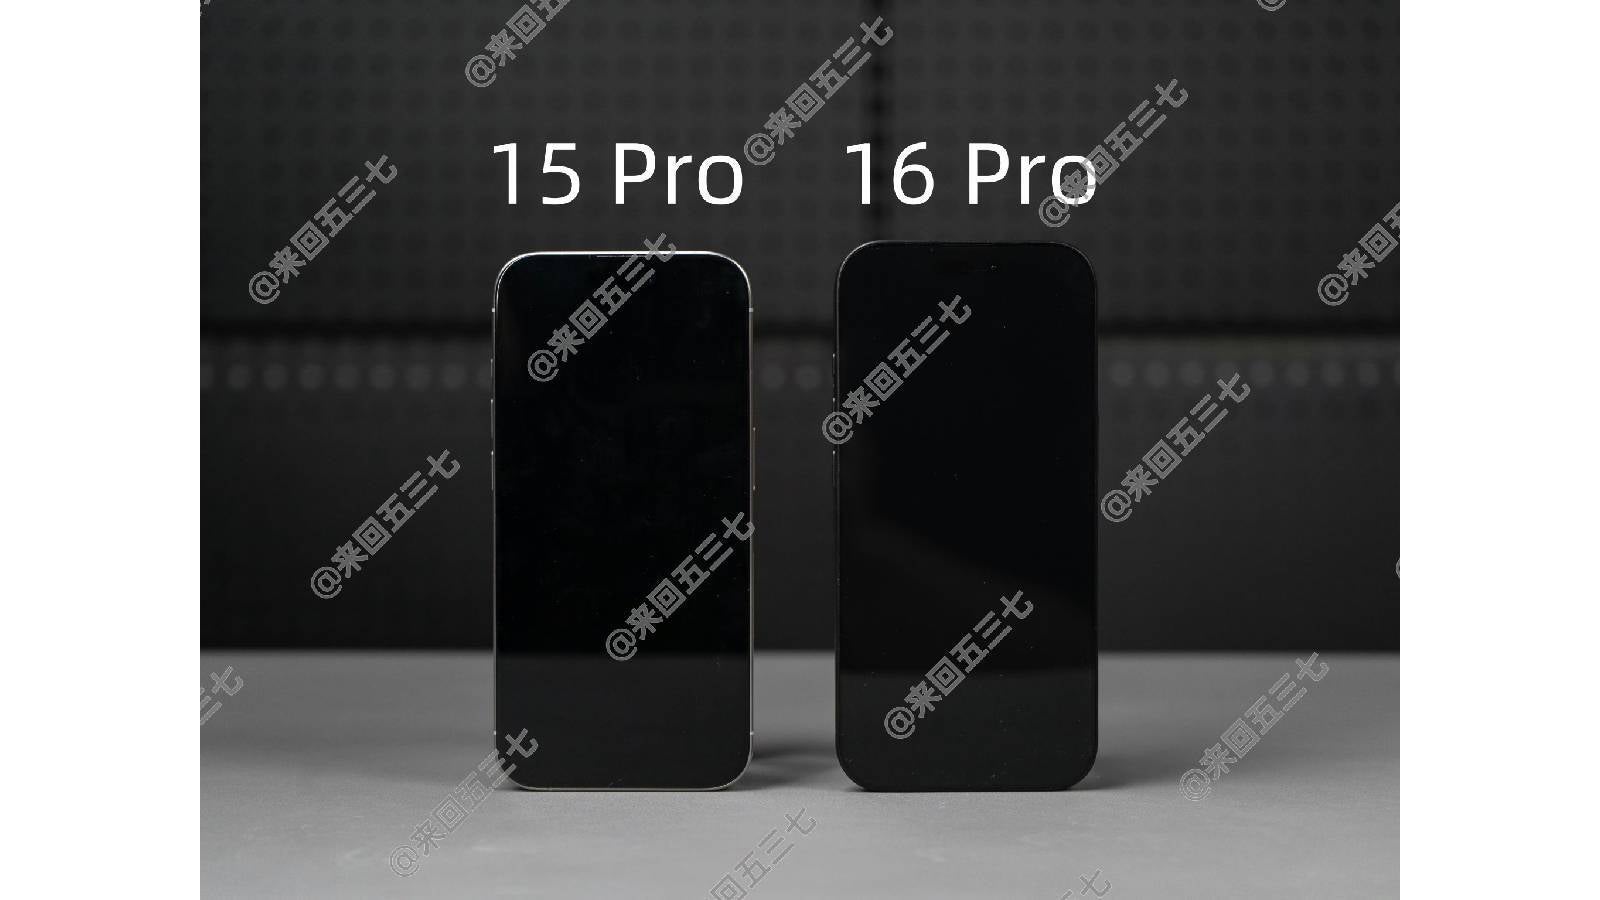 More photos of the iPhone 16 Pro and 15 Pro have leaked – can you tell which is which?